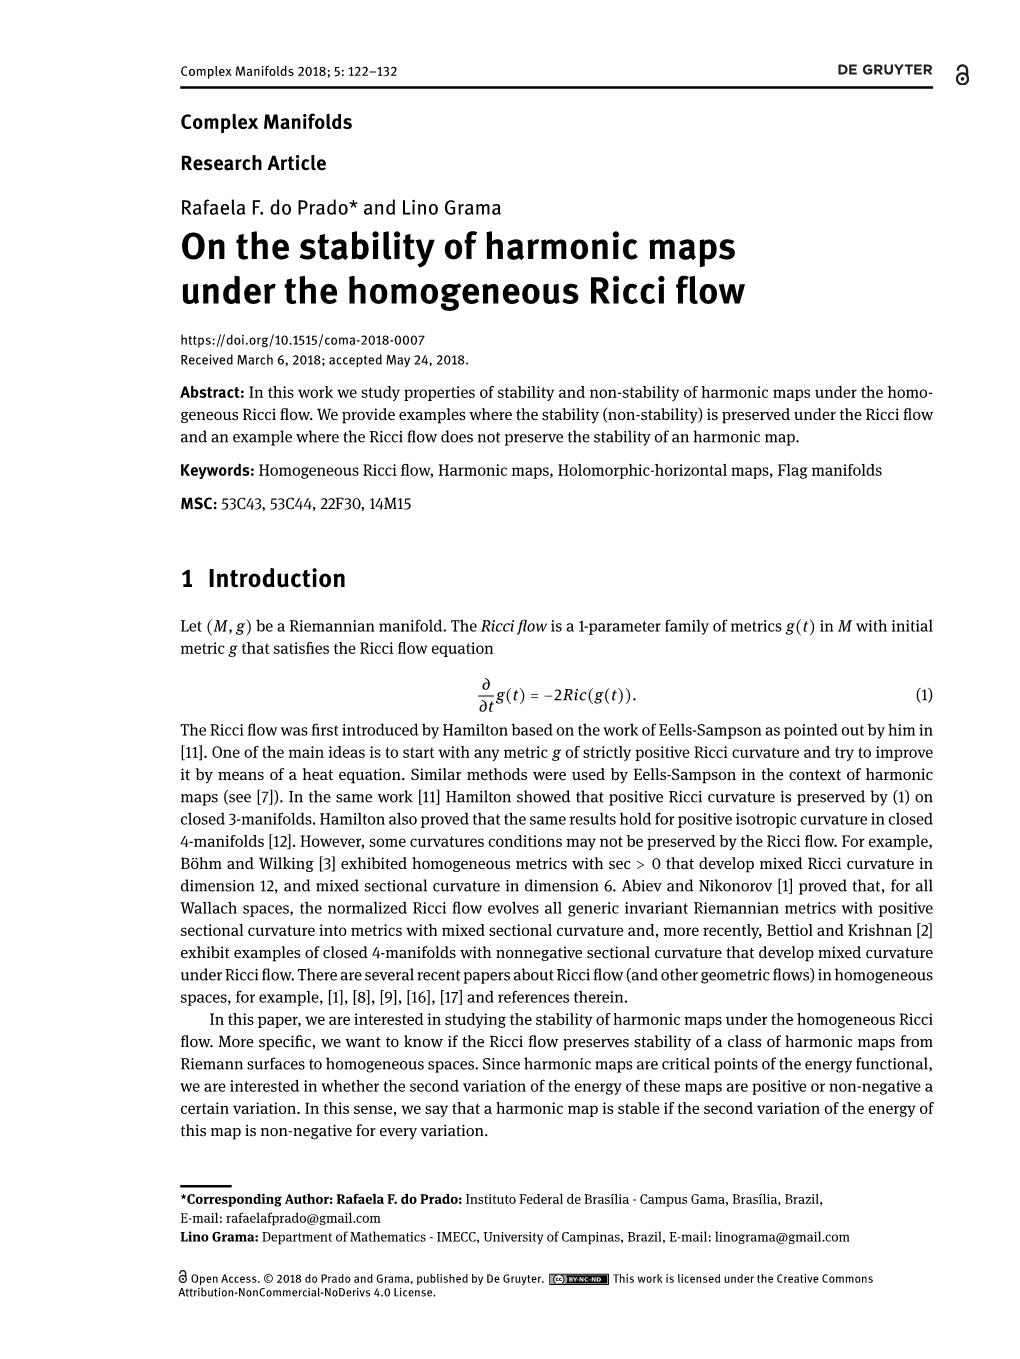 On the Stability of Harmonic Maps Under the Homogeneous Ricci Flow Received March 6, 2018; Accepted May 24, 2018